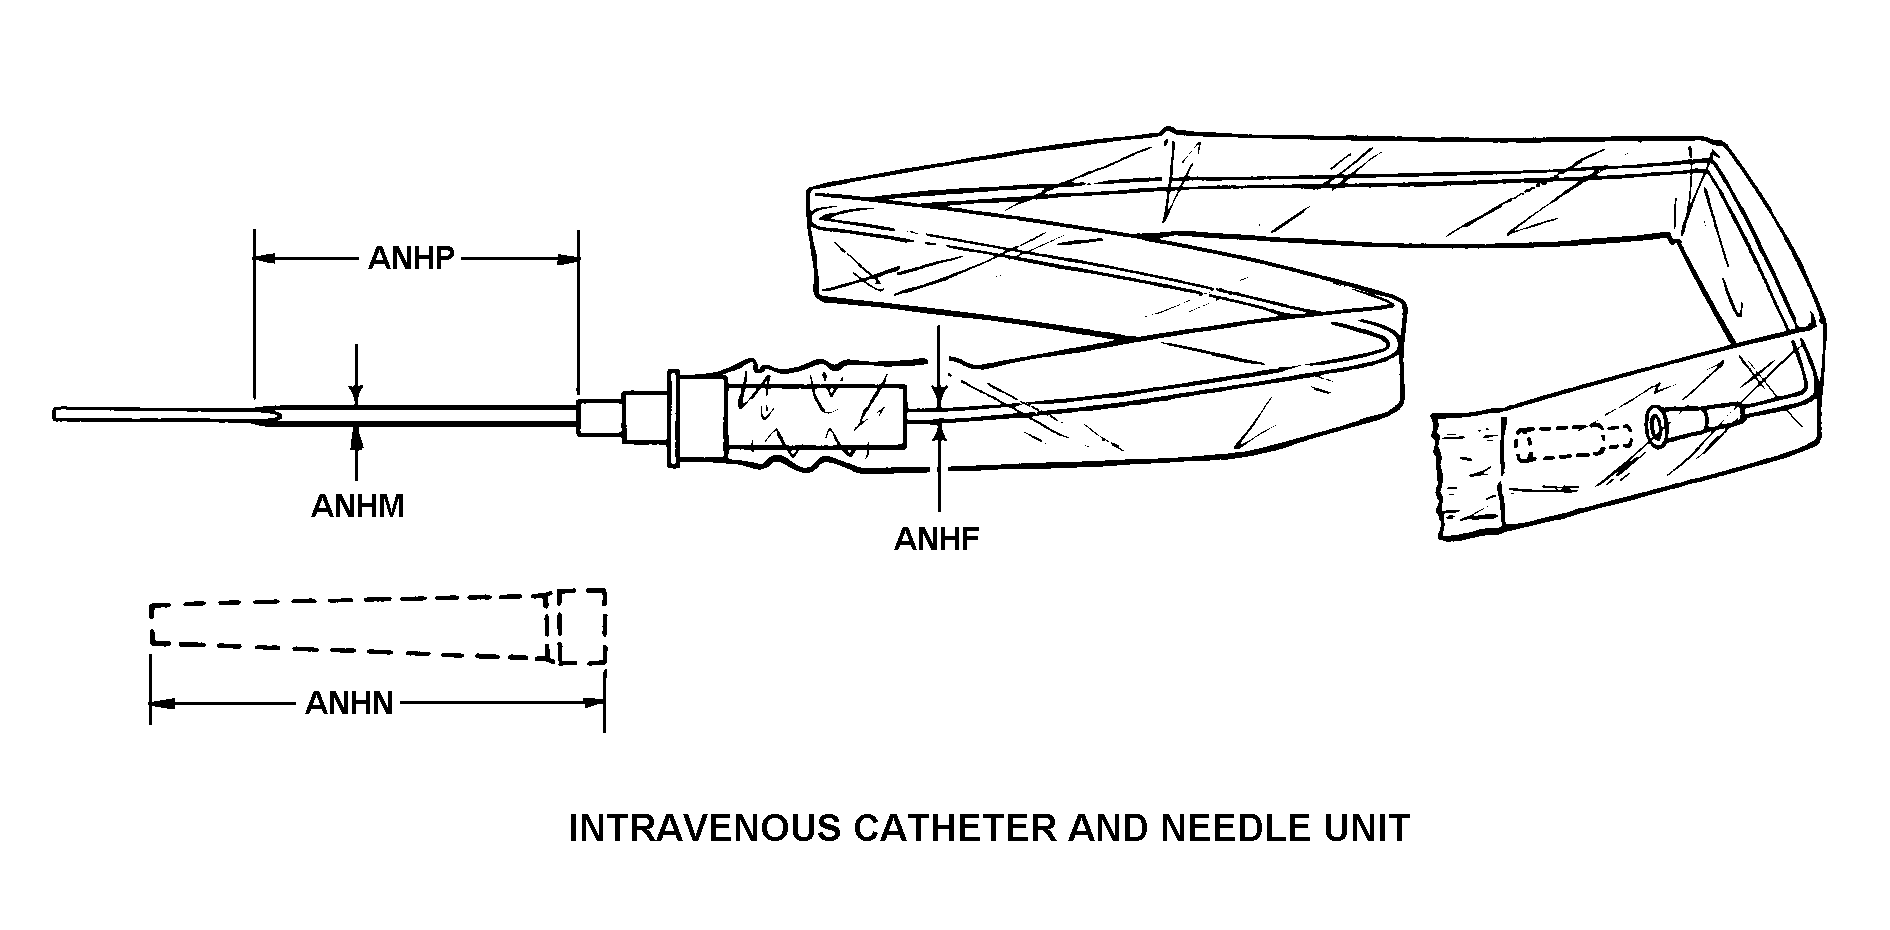 INTRAVENOUS CATHETER AND NEEDLE UNIT style nsn 6515-01-276-9476